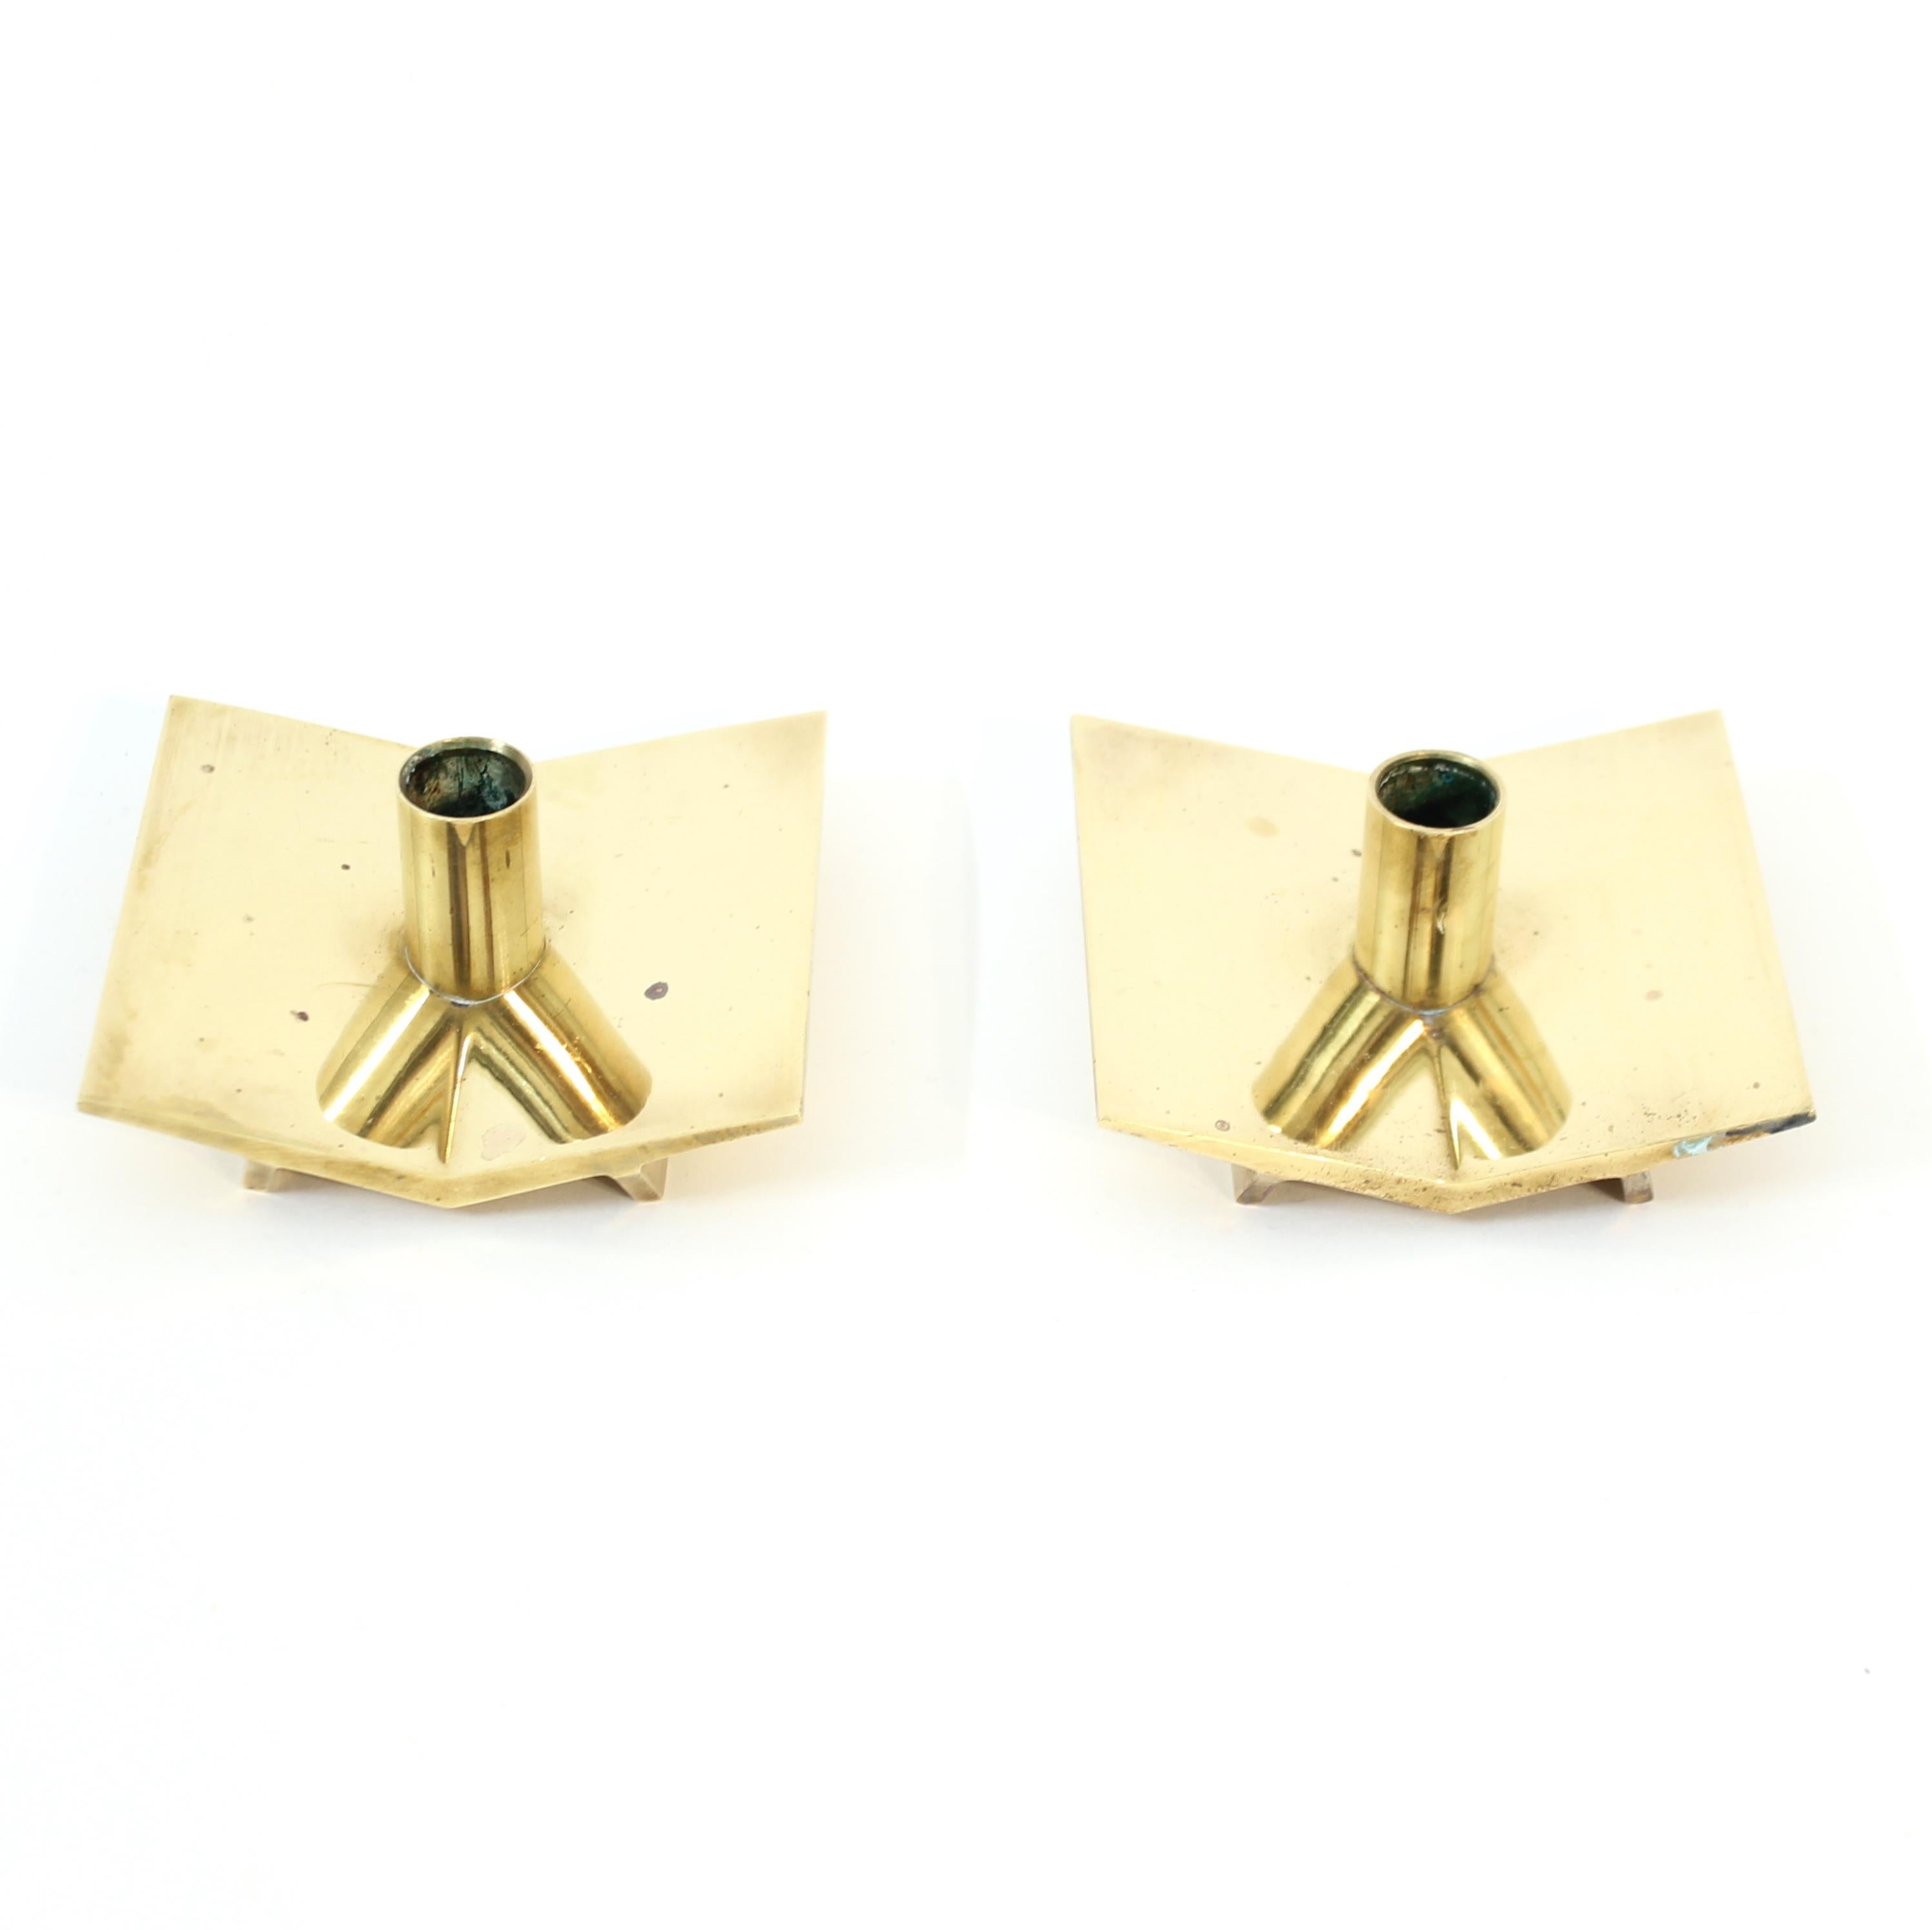 Scandinavian Modern Pierre Forsell, pair of candle holders for Ystad Metall, model Nr 70, 1960s For Sale